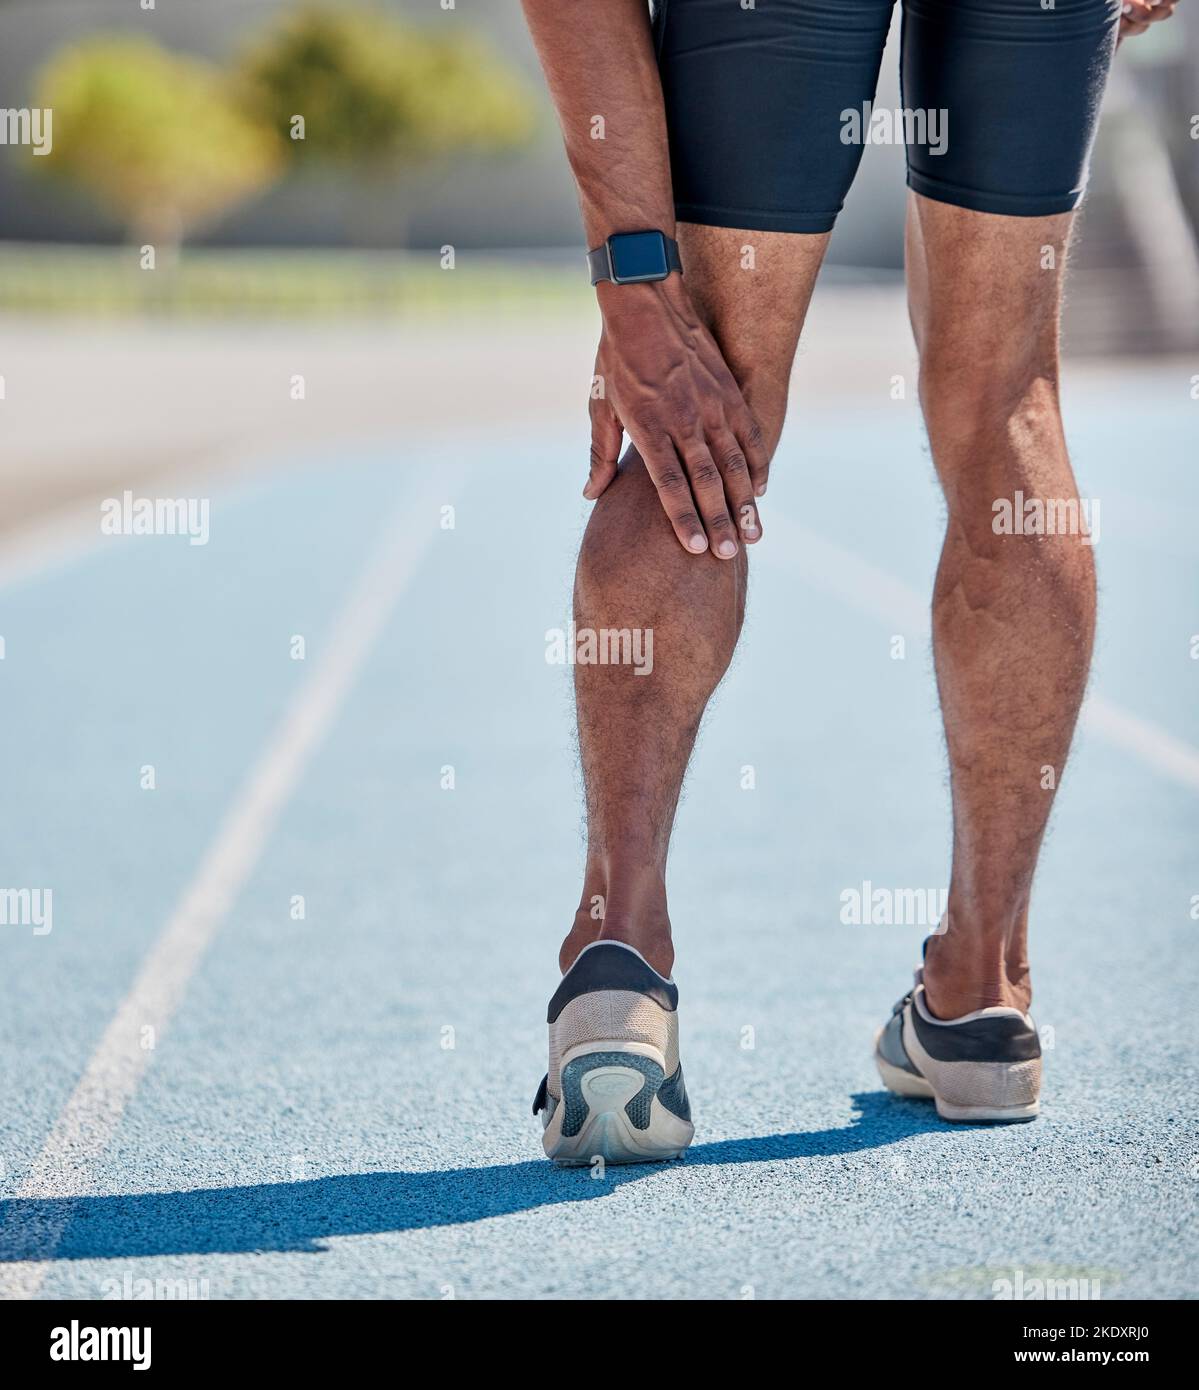 Legs injury for man running on track for cardio workout, sprint competition or marathon race. Muscle pain, calf problem and athlete runner with Stock Photo